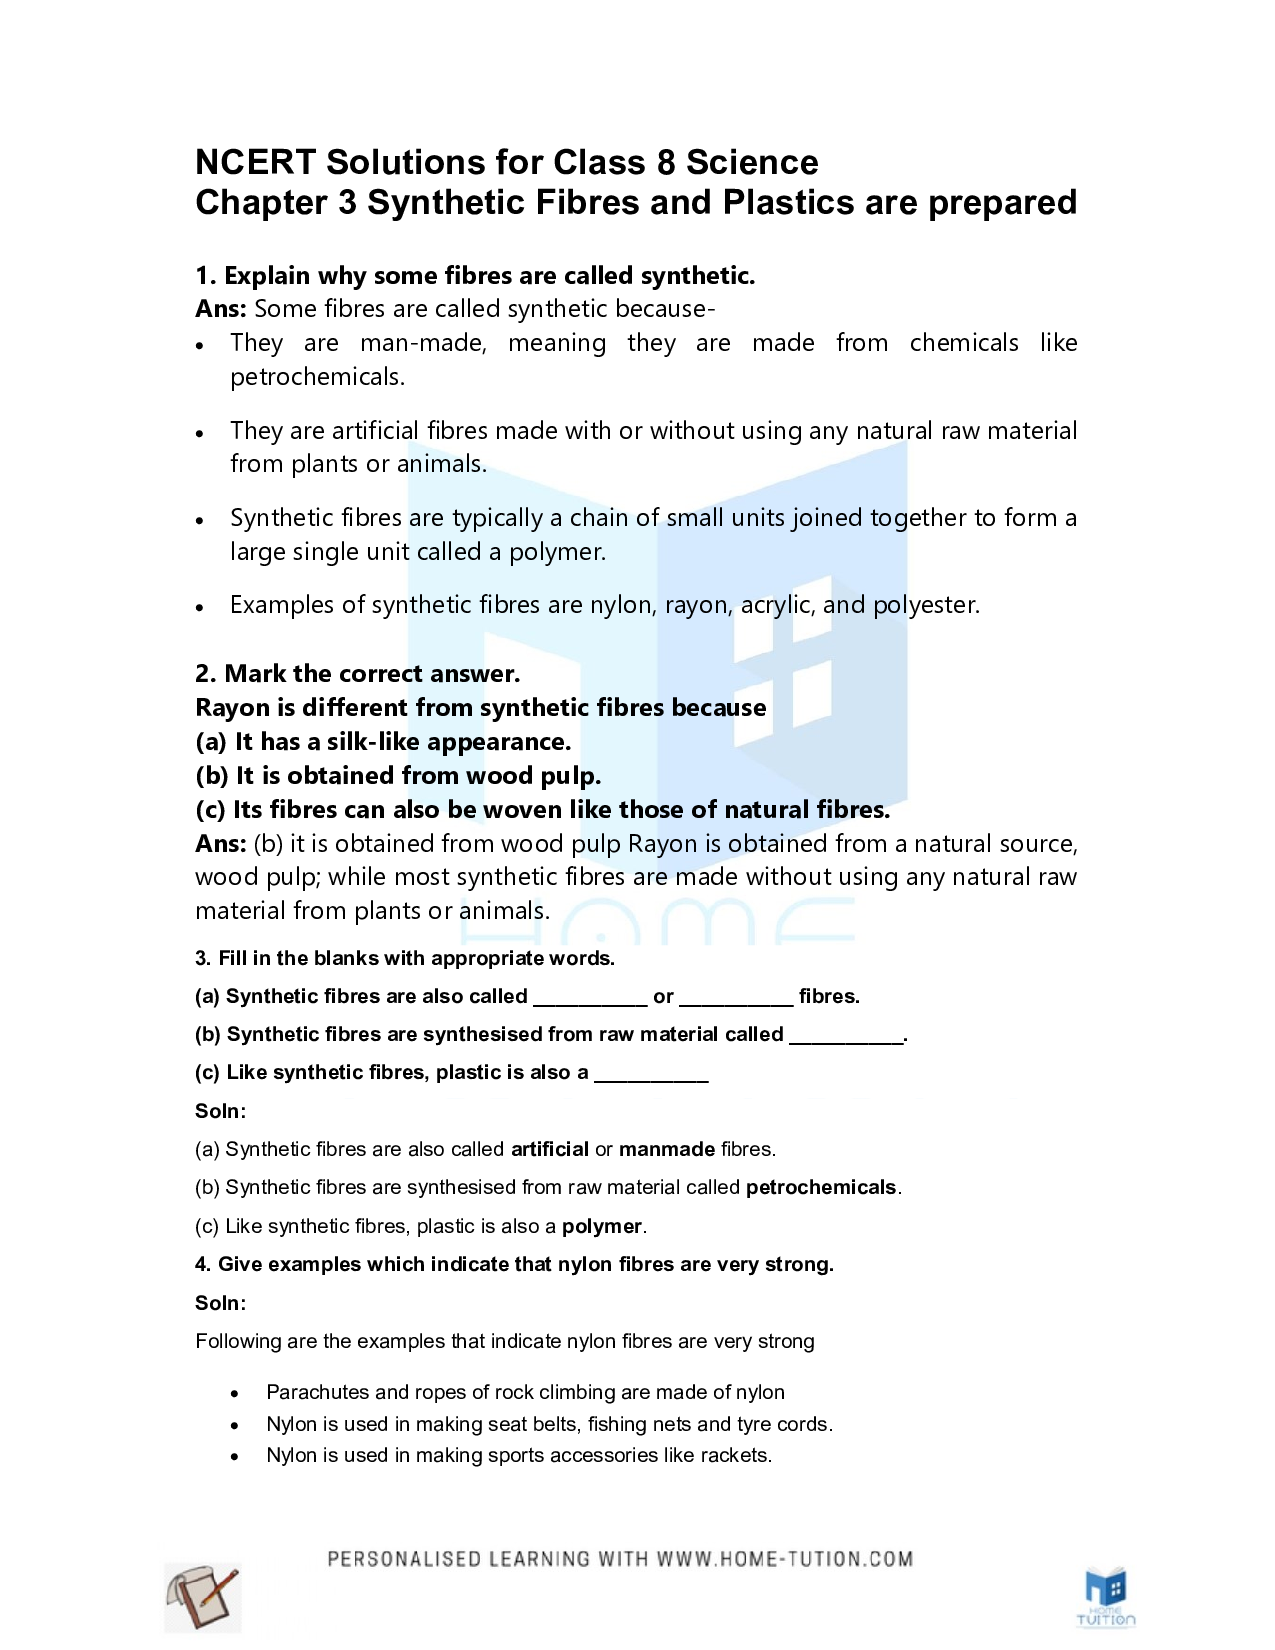 Class 8 Science Chapter 3 Synthetic Fibers and Plastics